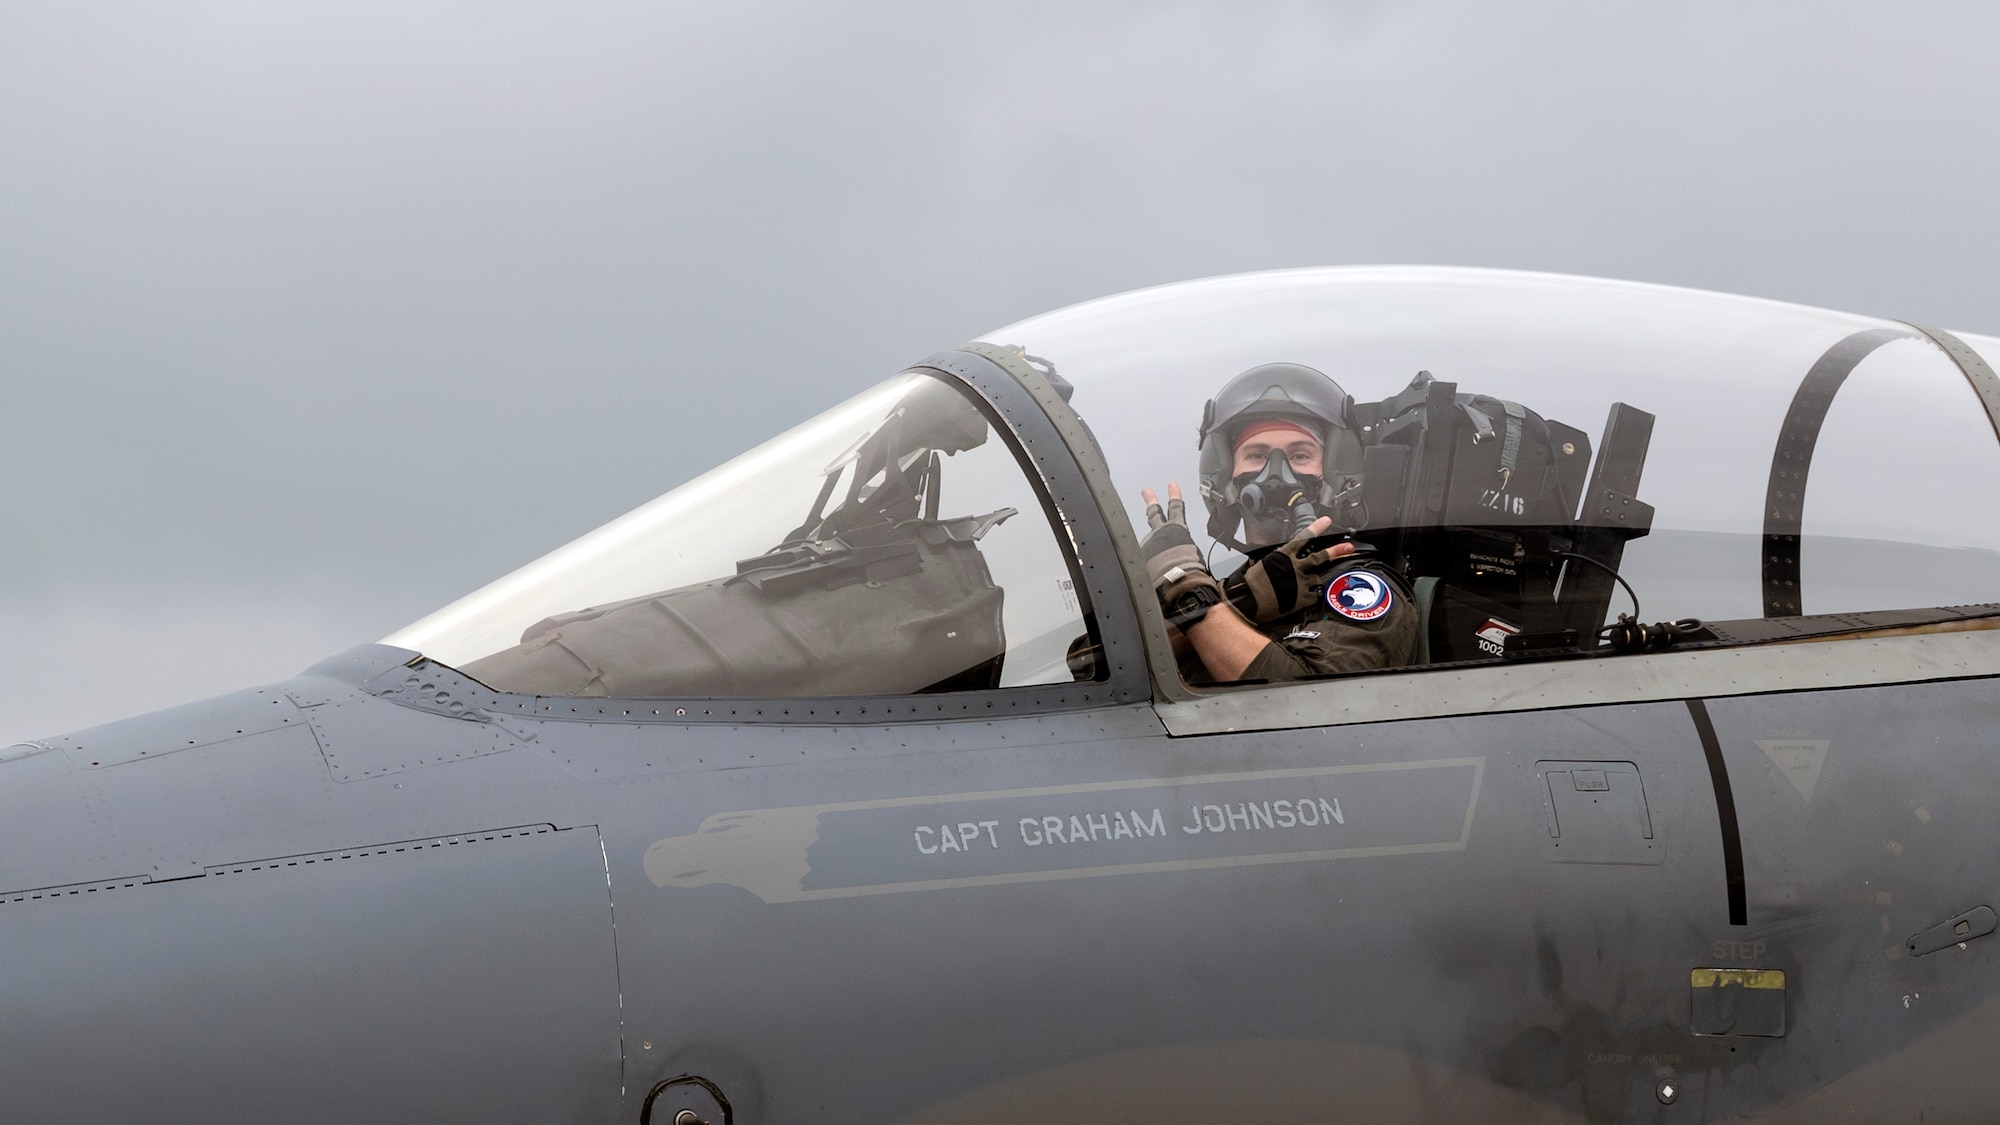 A U.S. Air Force pilot assigned to the 44th Fighter Squadron taxis down the flightline in an F-15C Eagle for the final time at Kadena Air Base, Japan, Dec. 1, 2022. The departure of the first batch of retiring Eagles is a necessary step in ensuring Team Kadena remains postured to defend Japan and maintain regional stability. (U.S. Air Force photo by Senior Airman Jessi Roth)